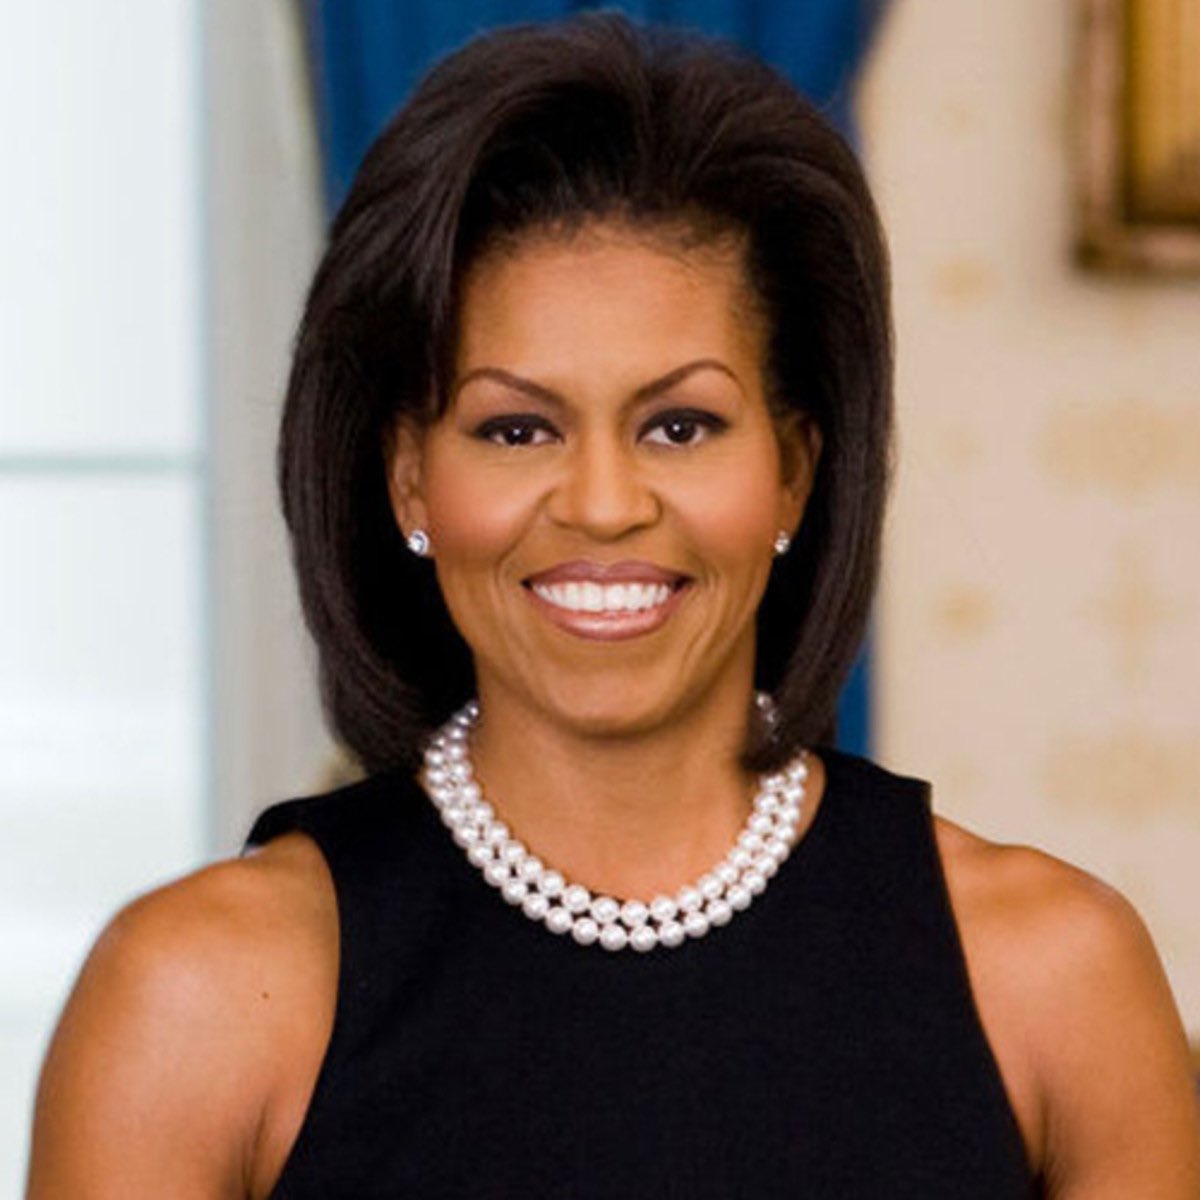 Michelle Obama has faced transphobia for her strong facial features and toned body. Republicans have consistently masculinzed and dehumanized her since she became First Lady. They have convinced so many idiots that she was born a man.